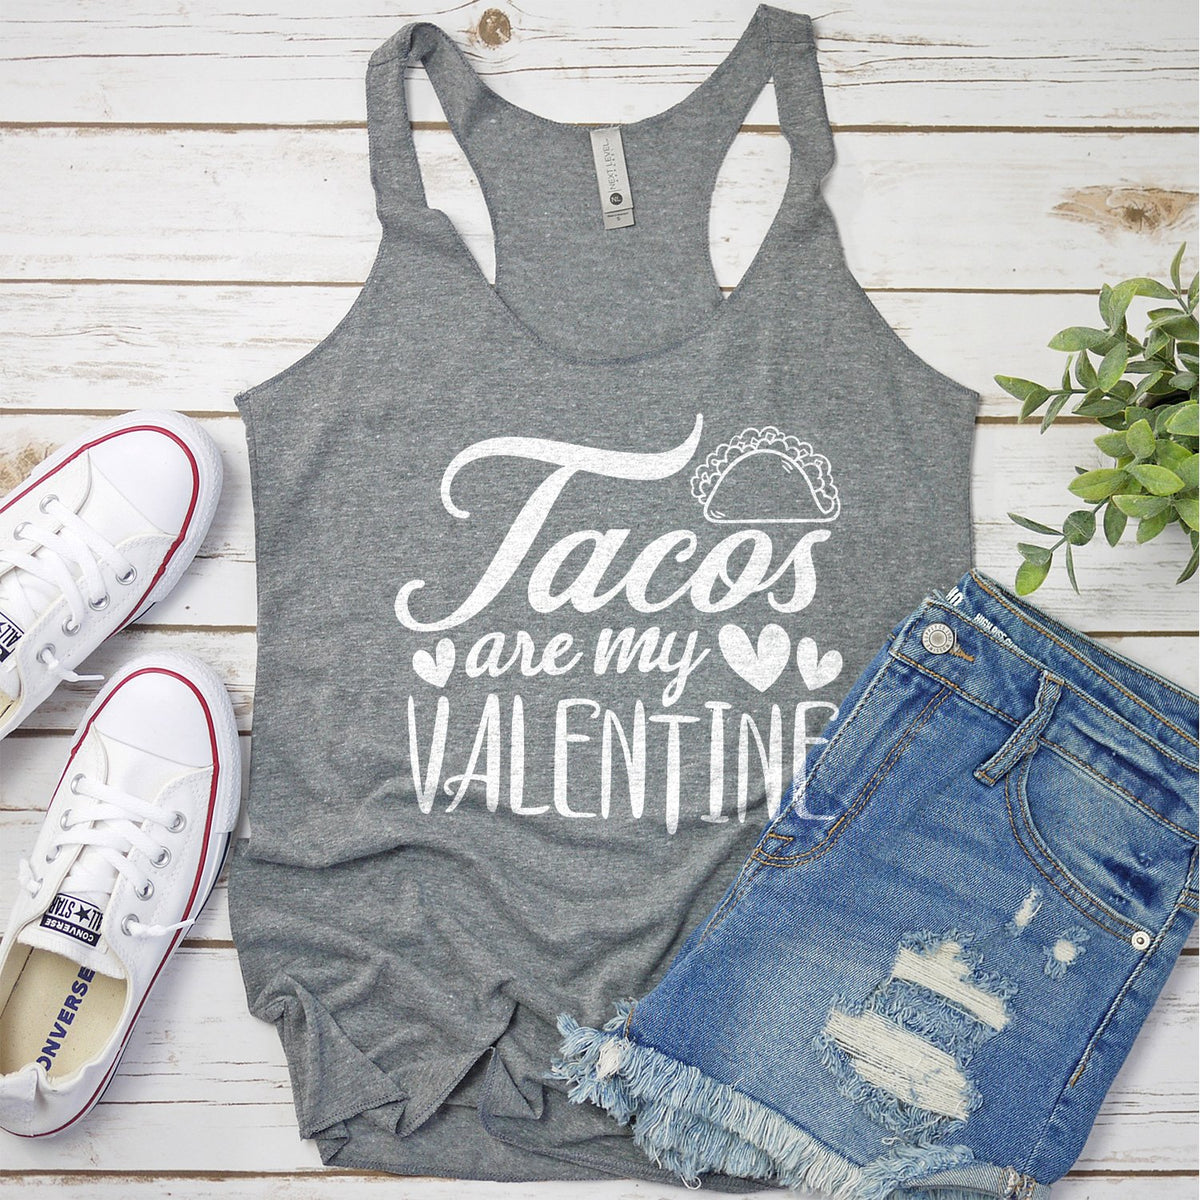 Tacos Are My Valentine - Tank Top Racerback